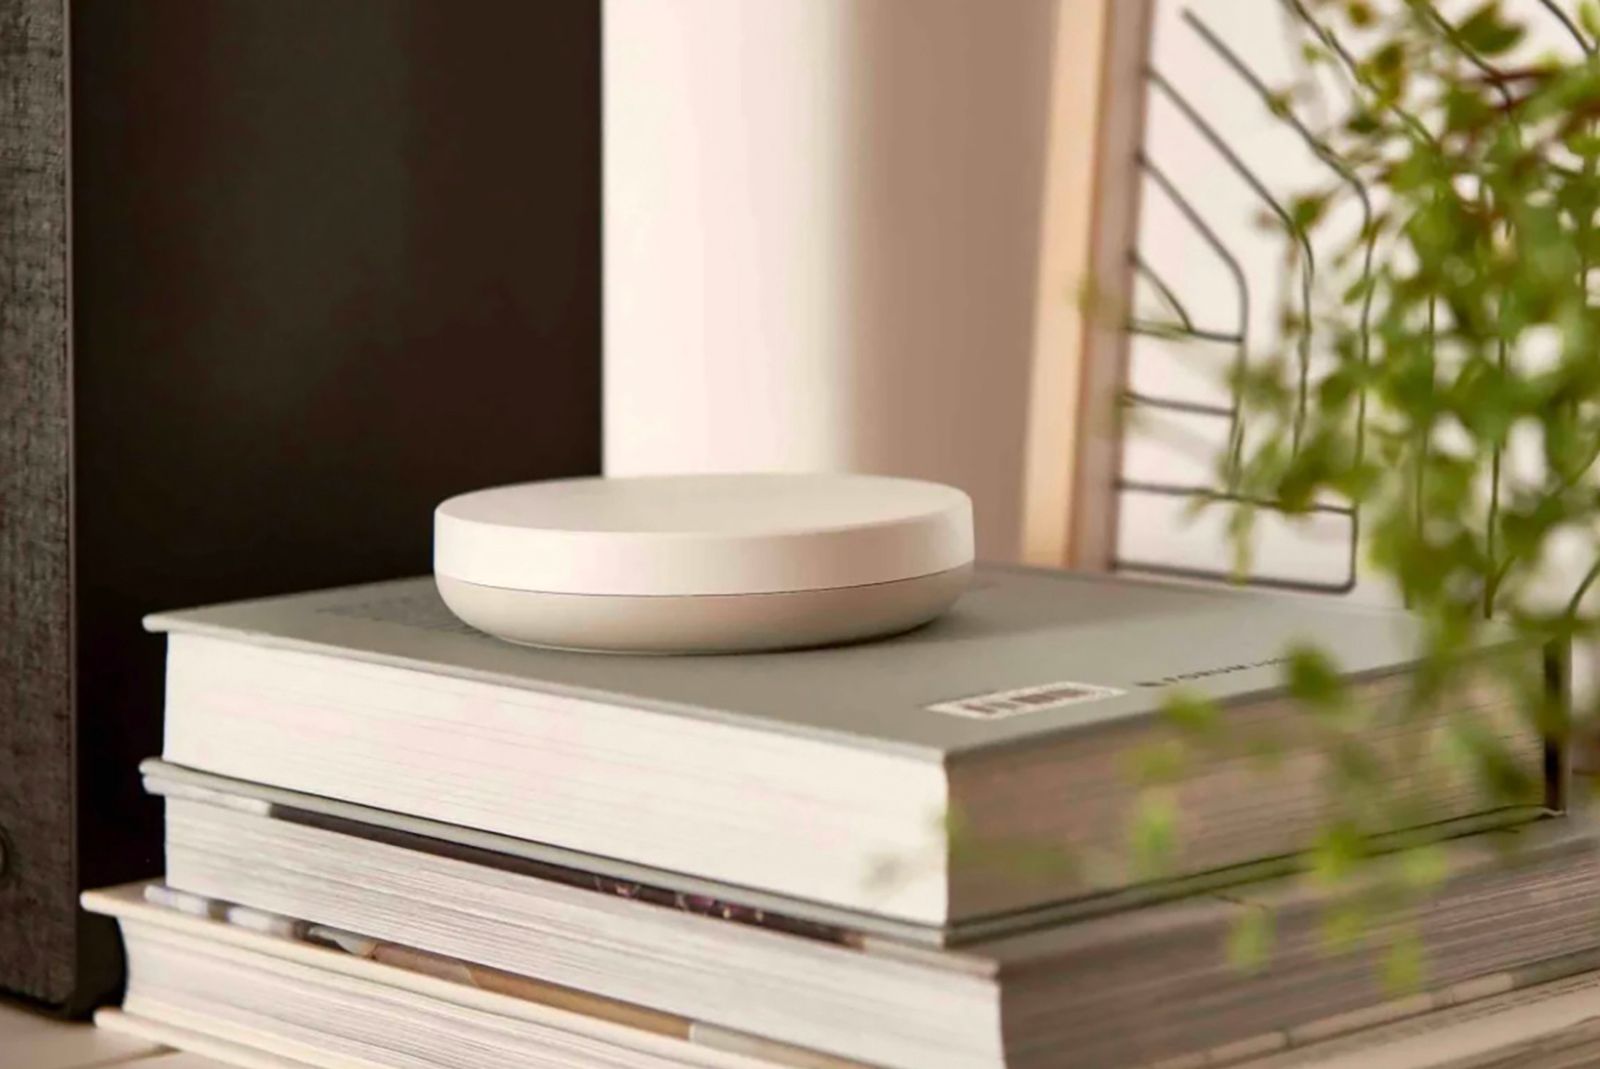 Ikea's new smart home hub comes with Matter support and a new 'Home' app photo 3